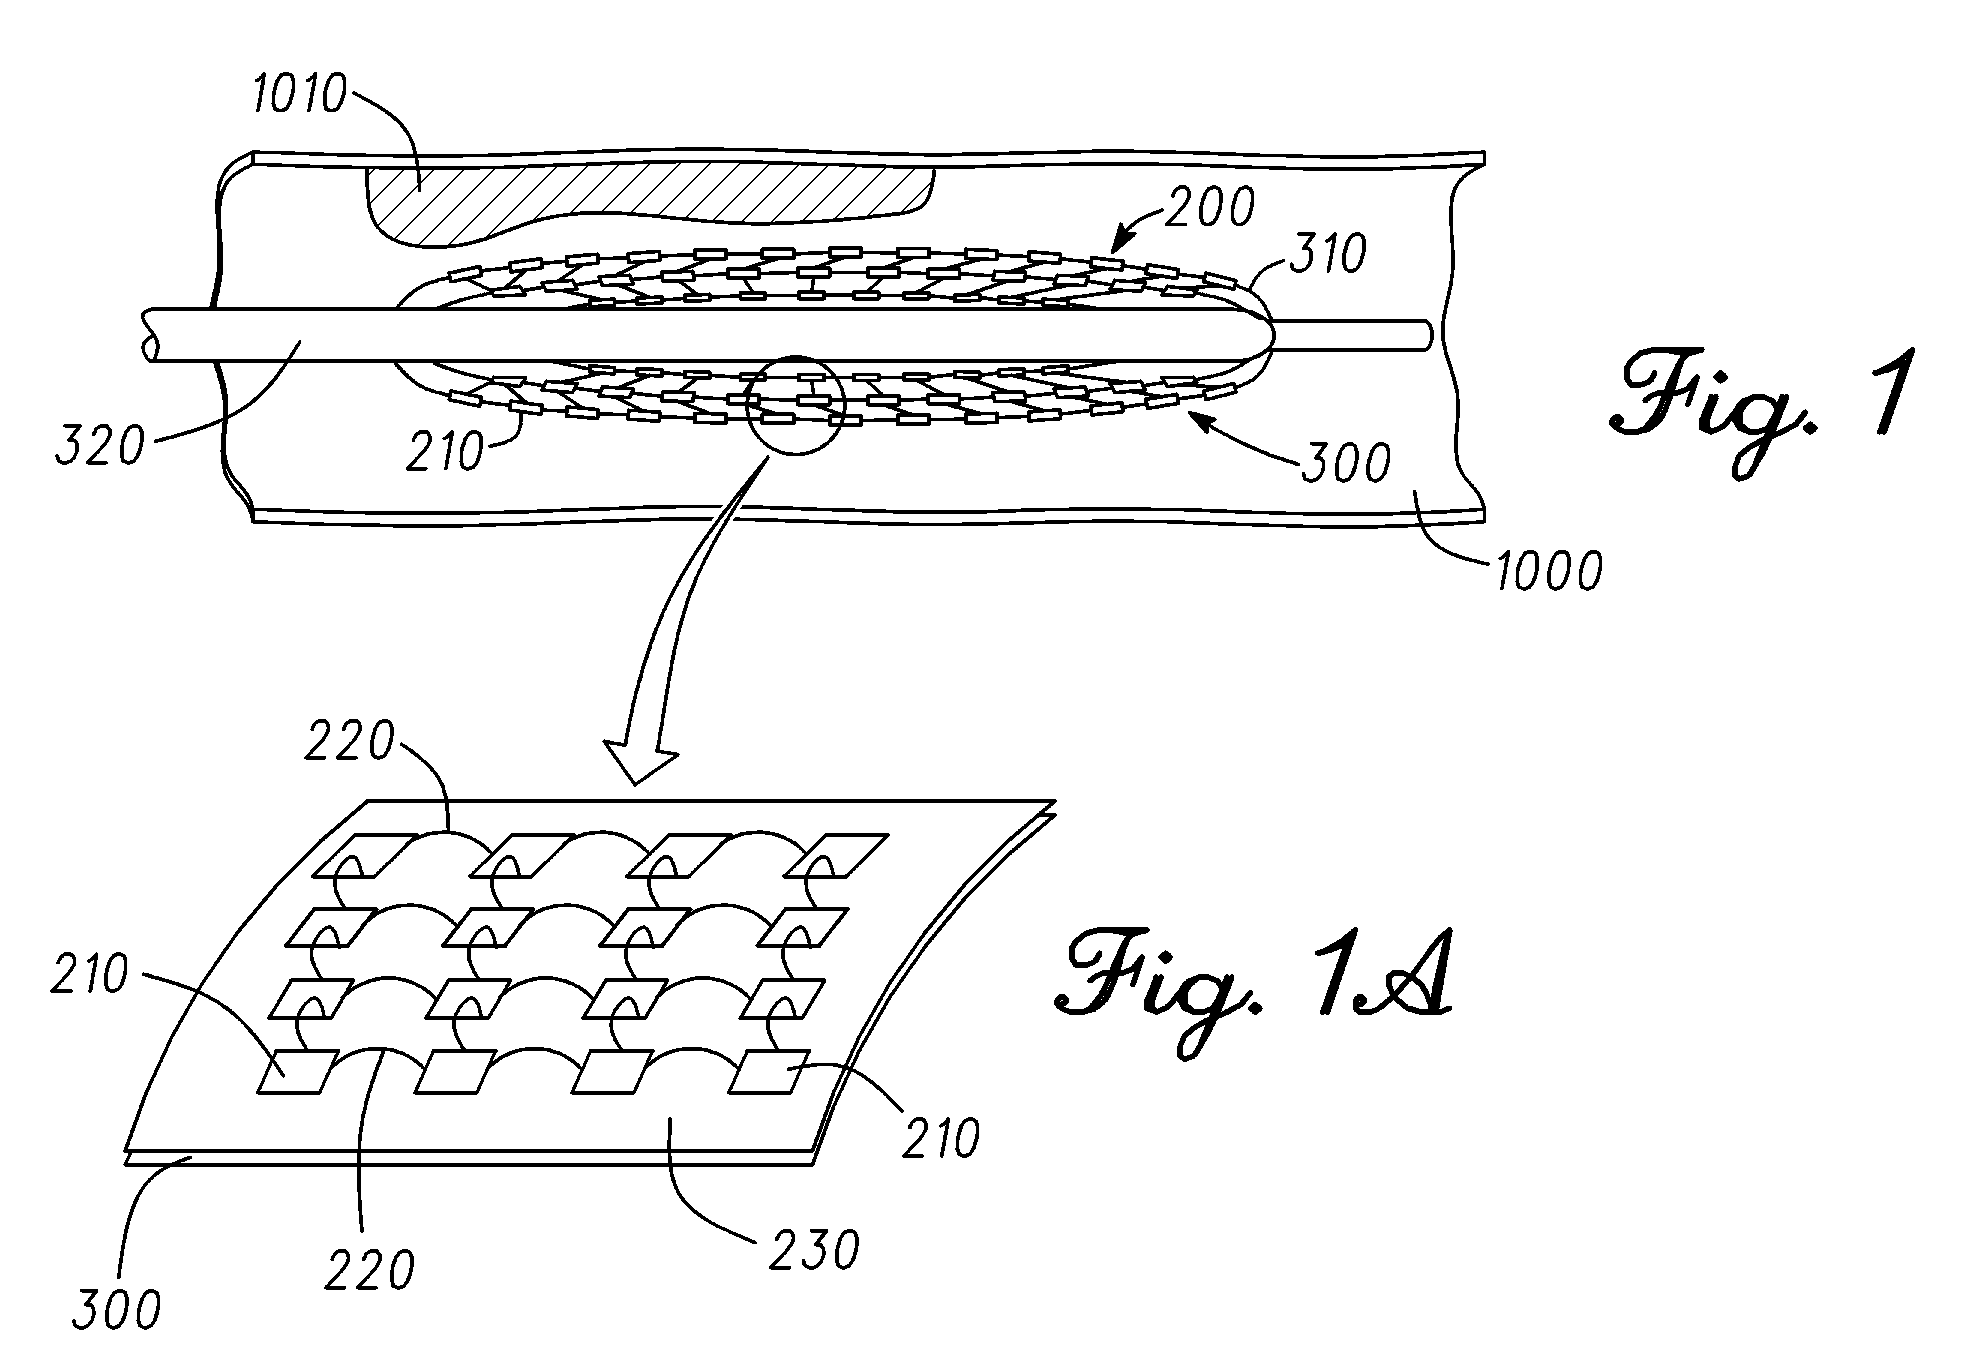 Catheter balloon having stretchable integrated circuitry and sensor array